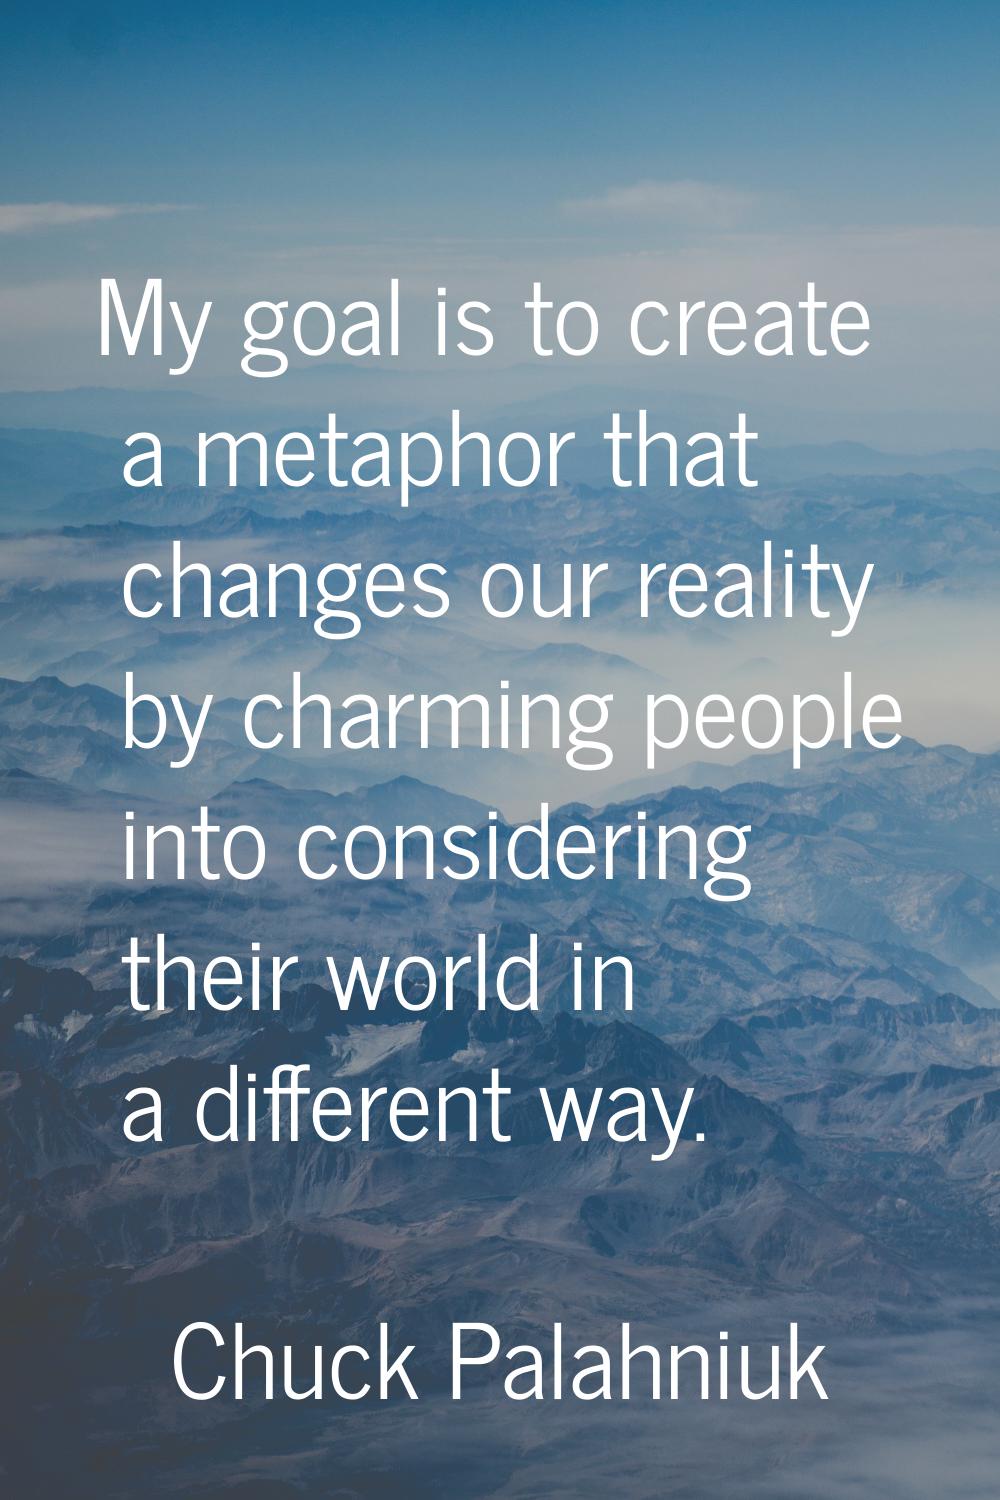 My goal is to create a metaphor that changes our reality by charming people into considering their 